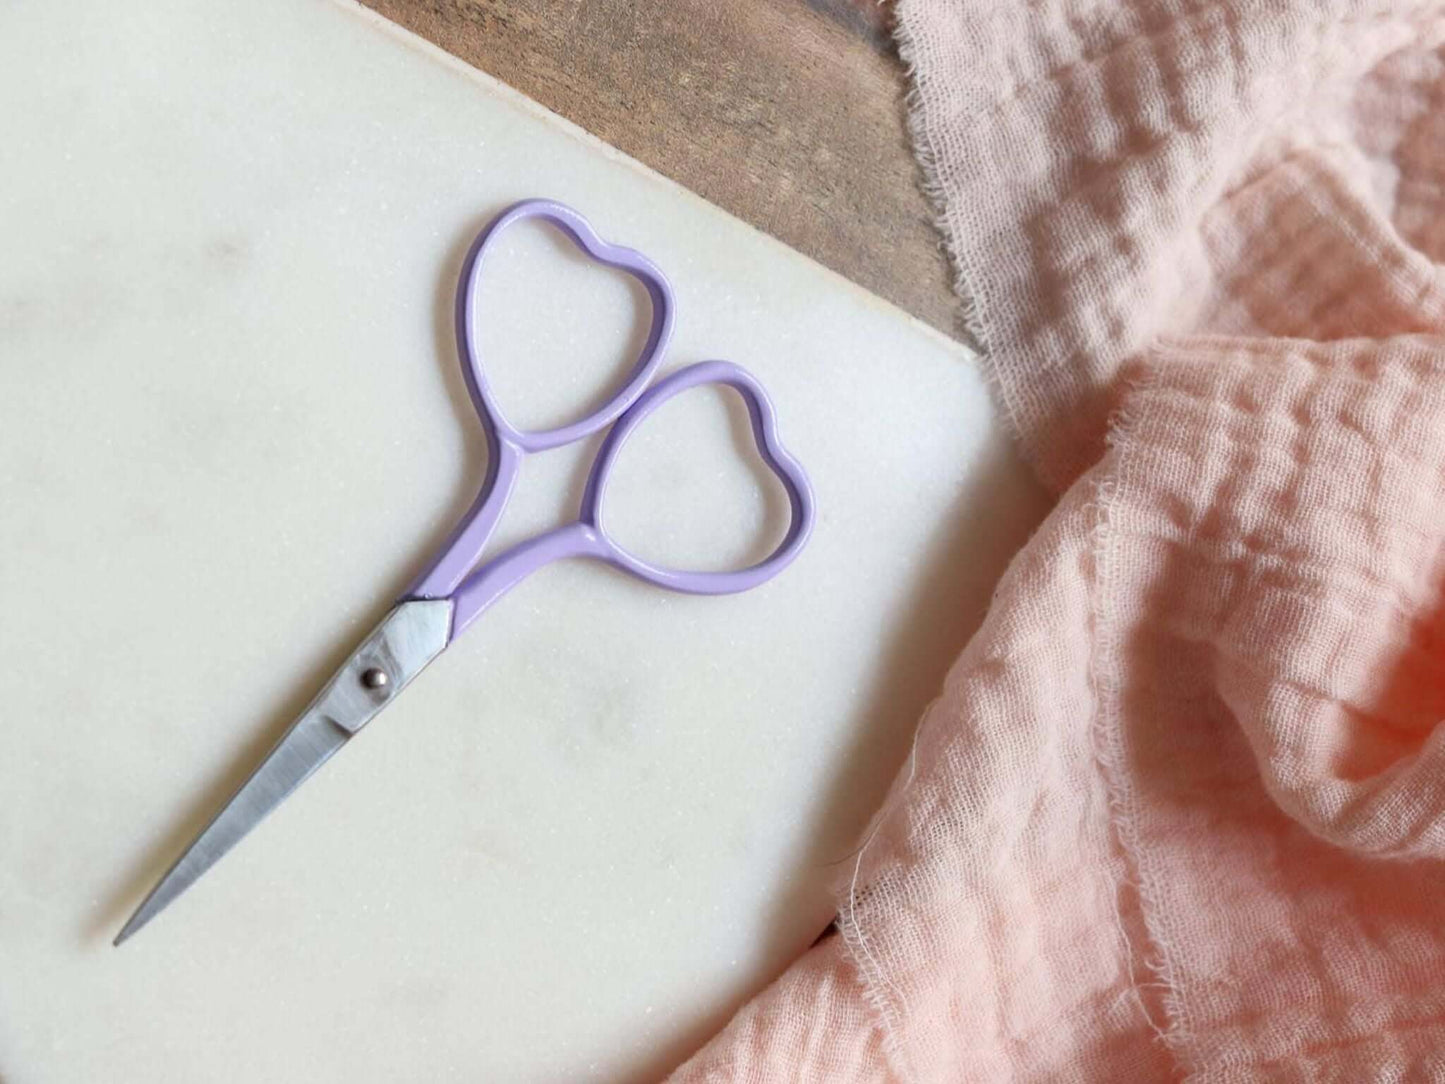 Heart shaped embroidery scissors in a lilac purple color